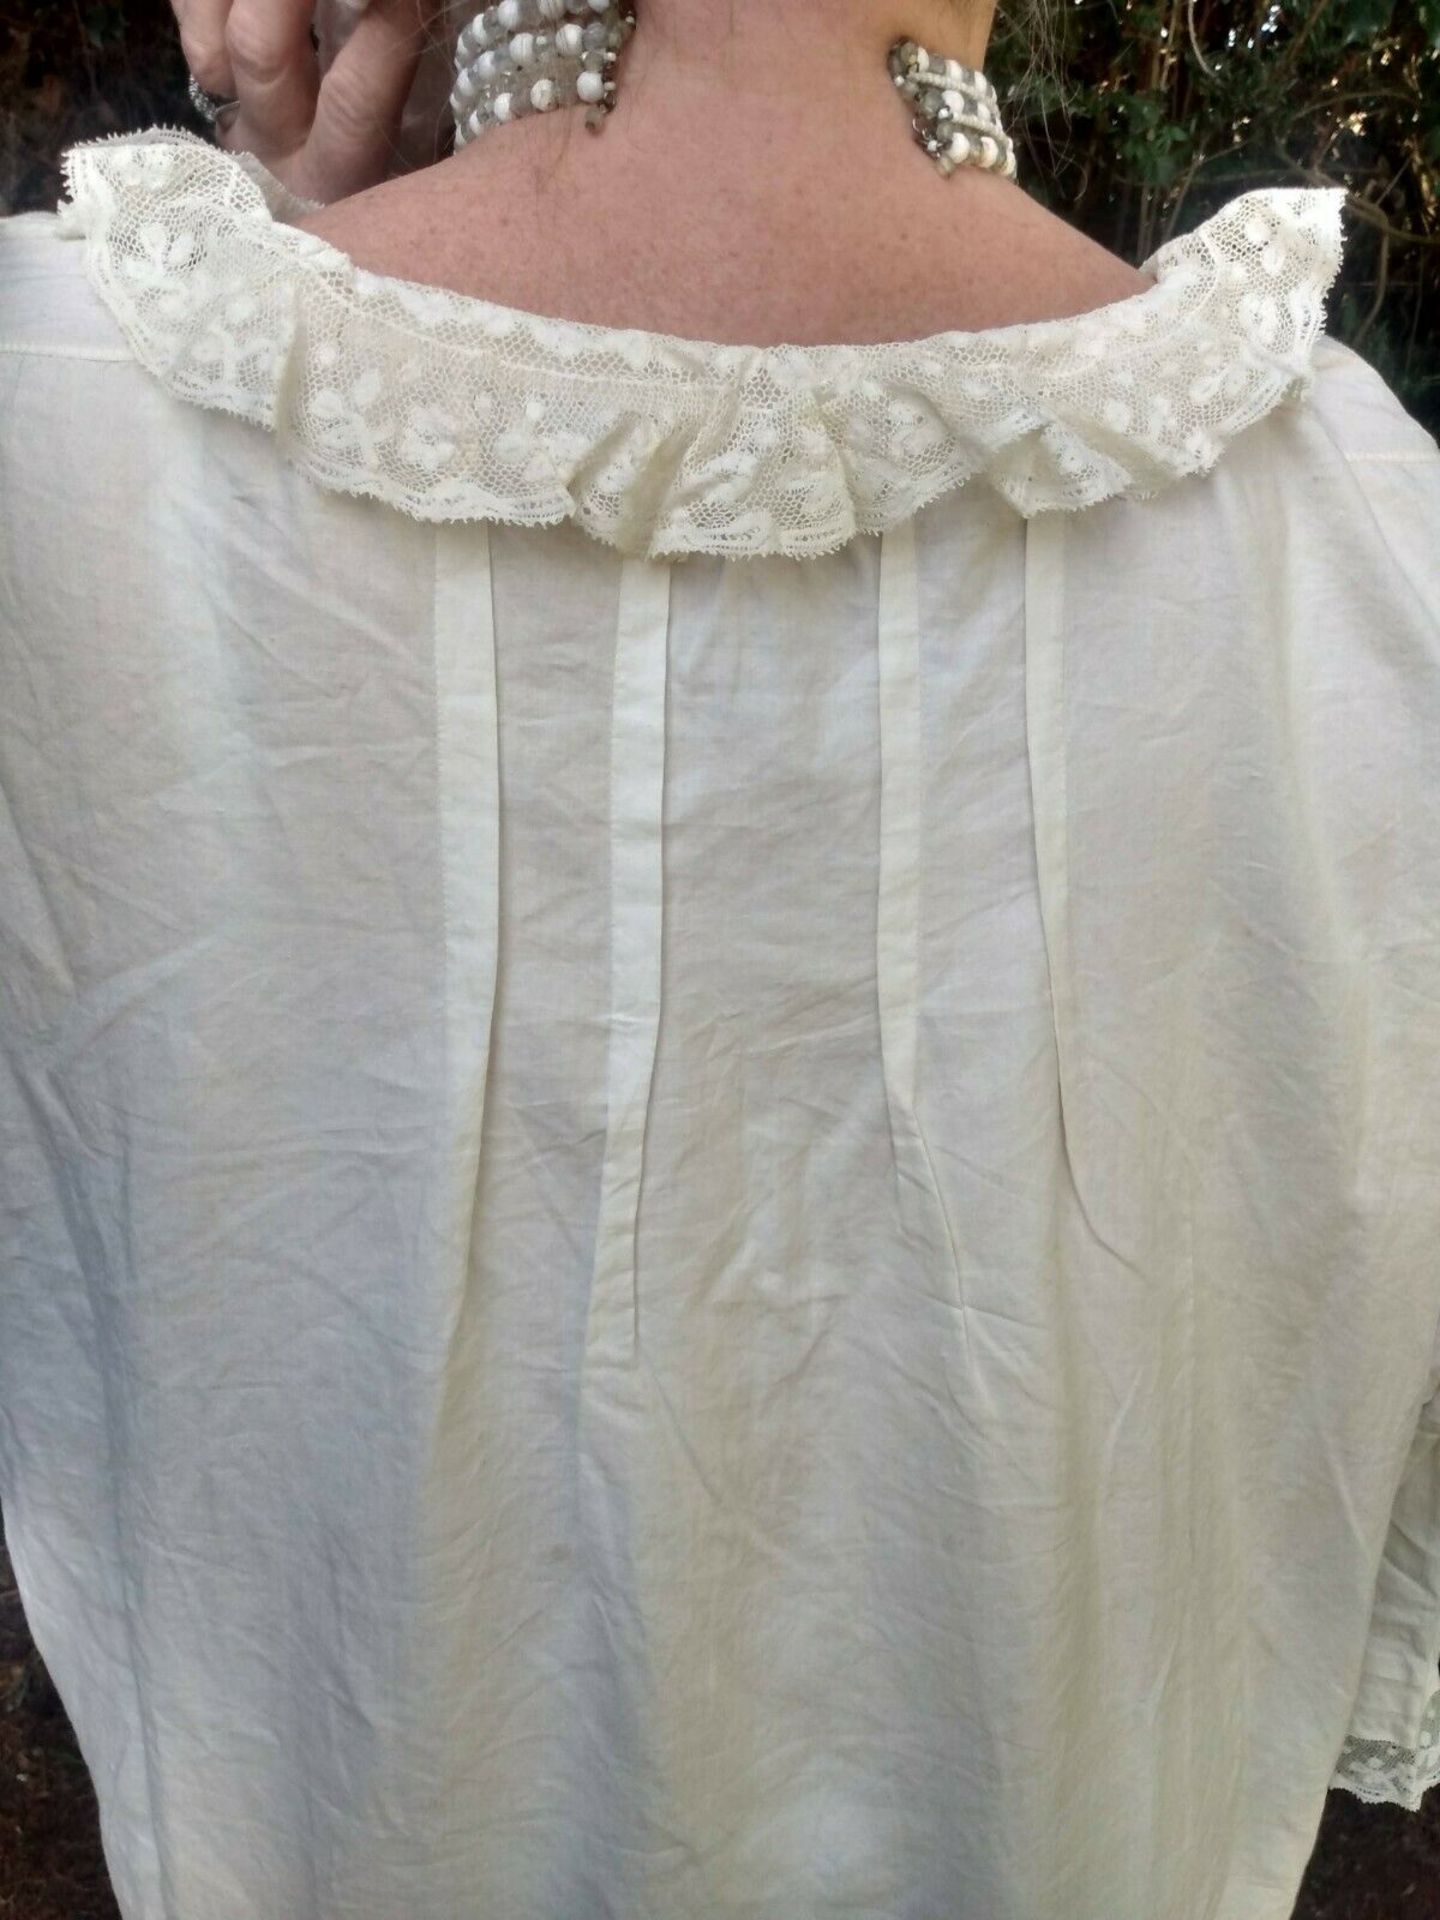 Royalty Queen Victoria's Nightdress 100% Cotton Embroidered CROWN above VR No 36 being No 36 of - Image 5 of 12